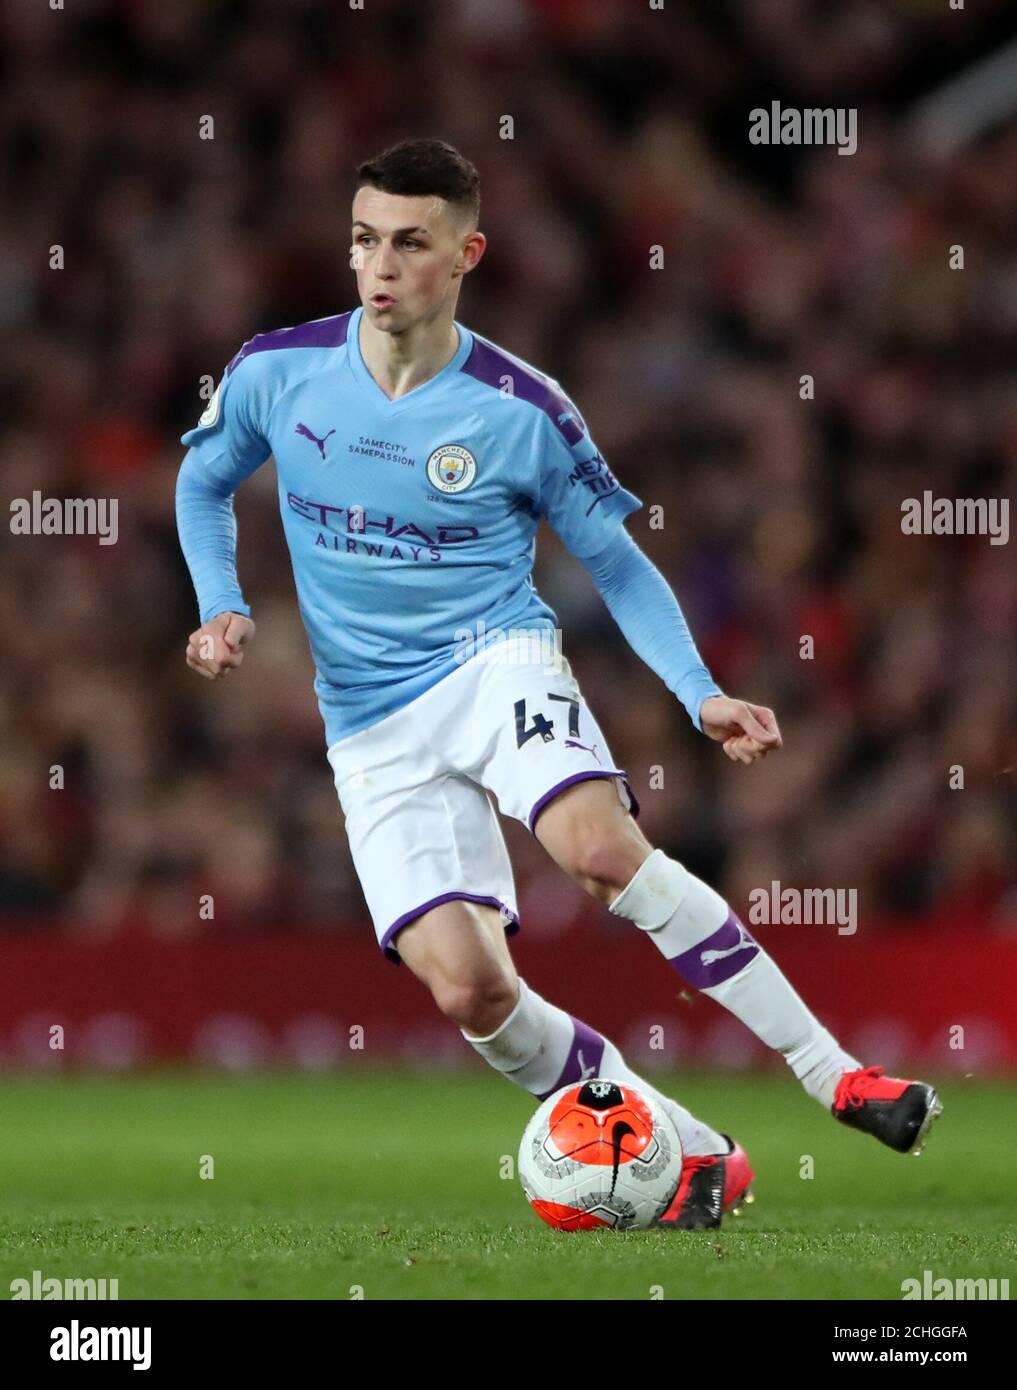 Manchester City's Phil Foden during the Premier League match at Old Trafford, Manchester. Stock Photo